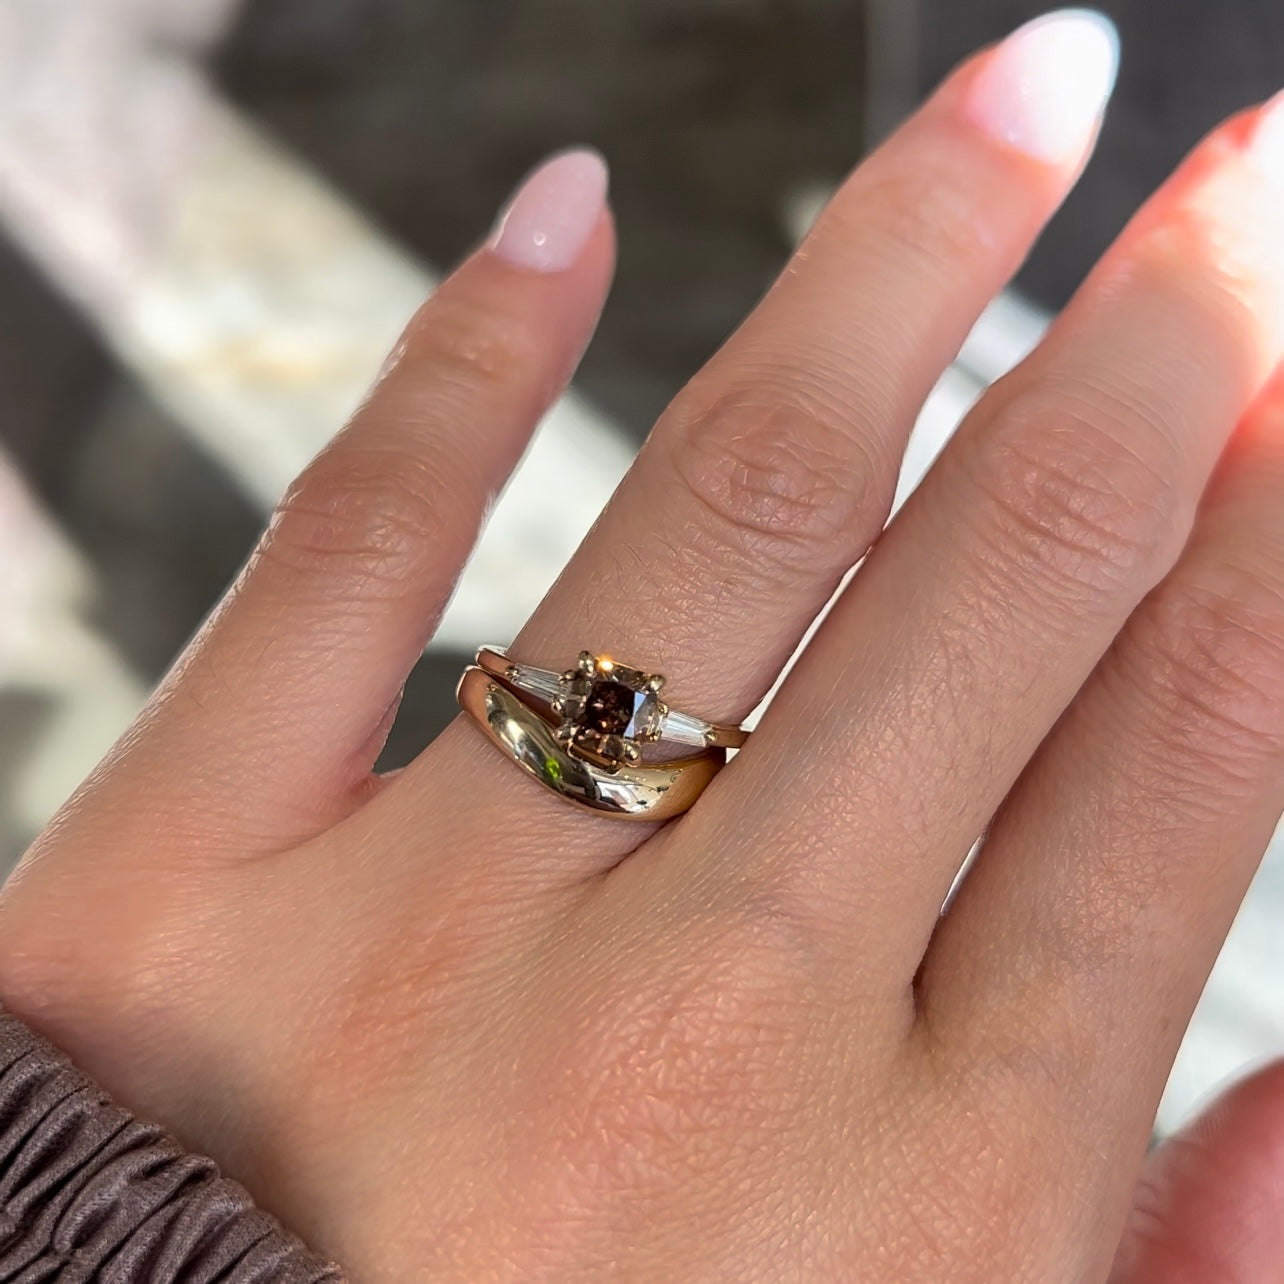 14k yellow gold engagement ring with a fancy brown cushion diamond and tapered baguette diamond accents worn with a thick gold curved wedding band